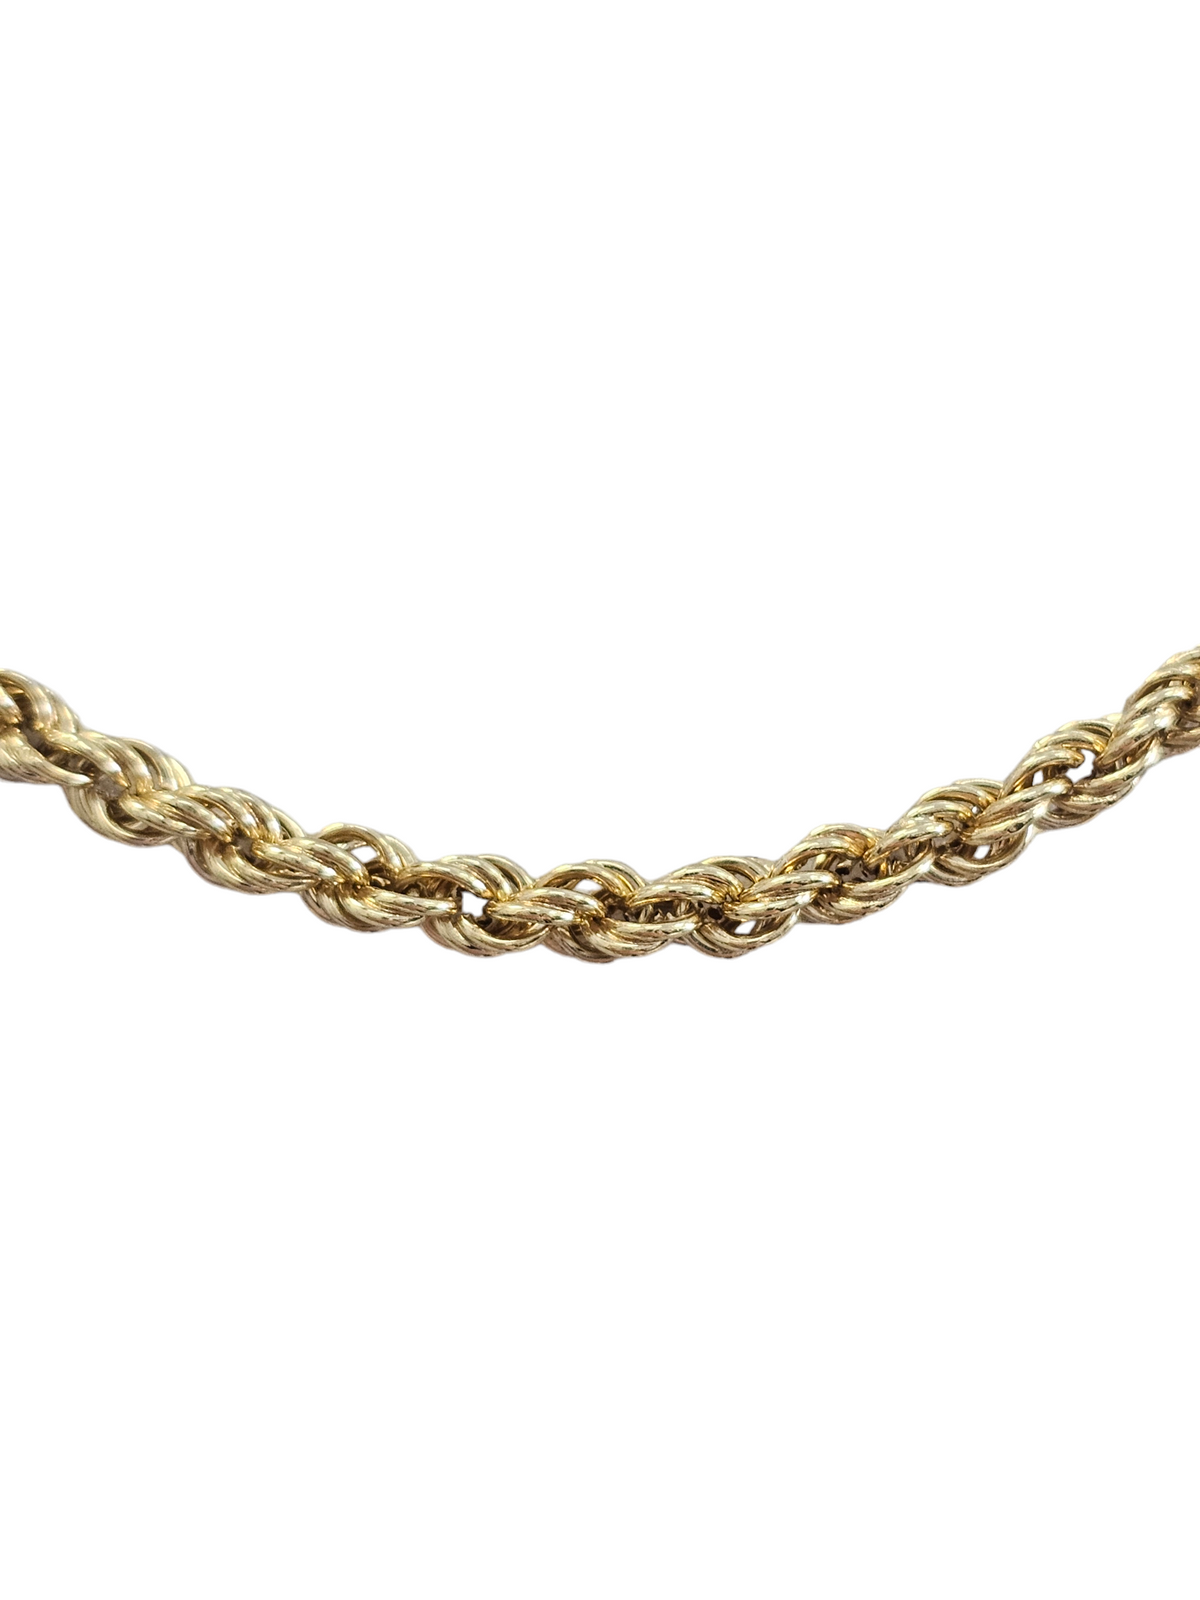 Rope chain 3.3 mm made in solid 14-karat yellow gold 25 inches